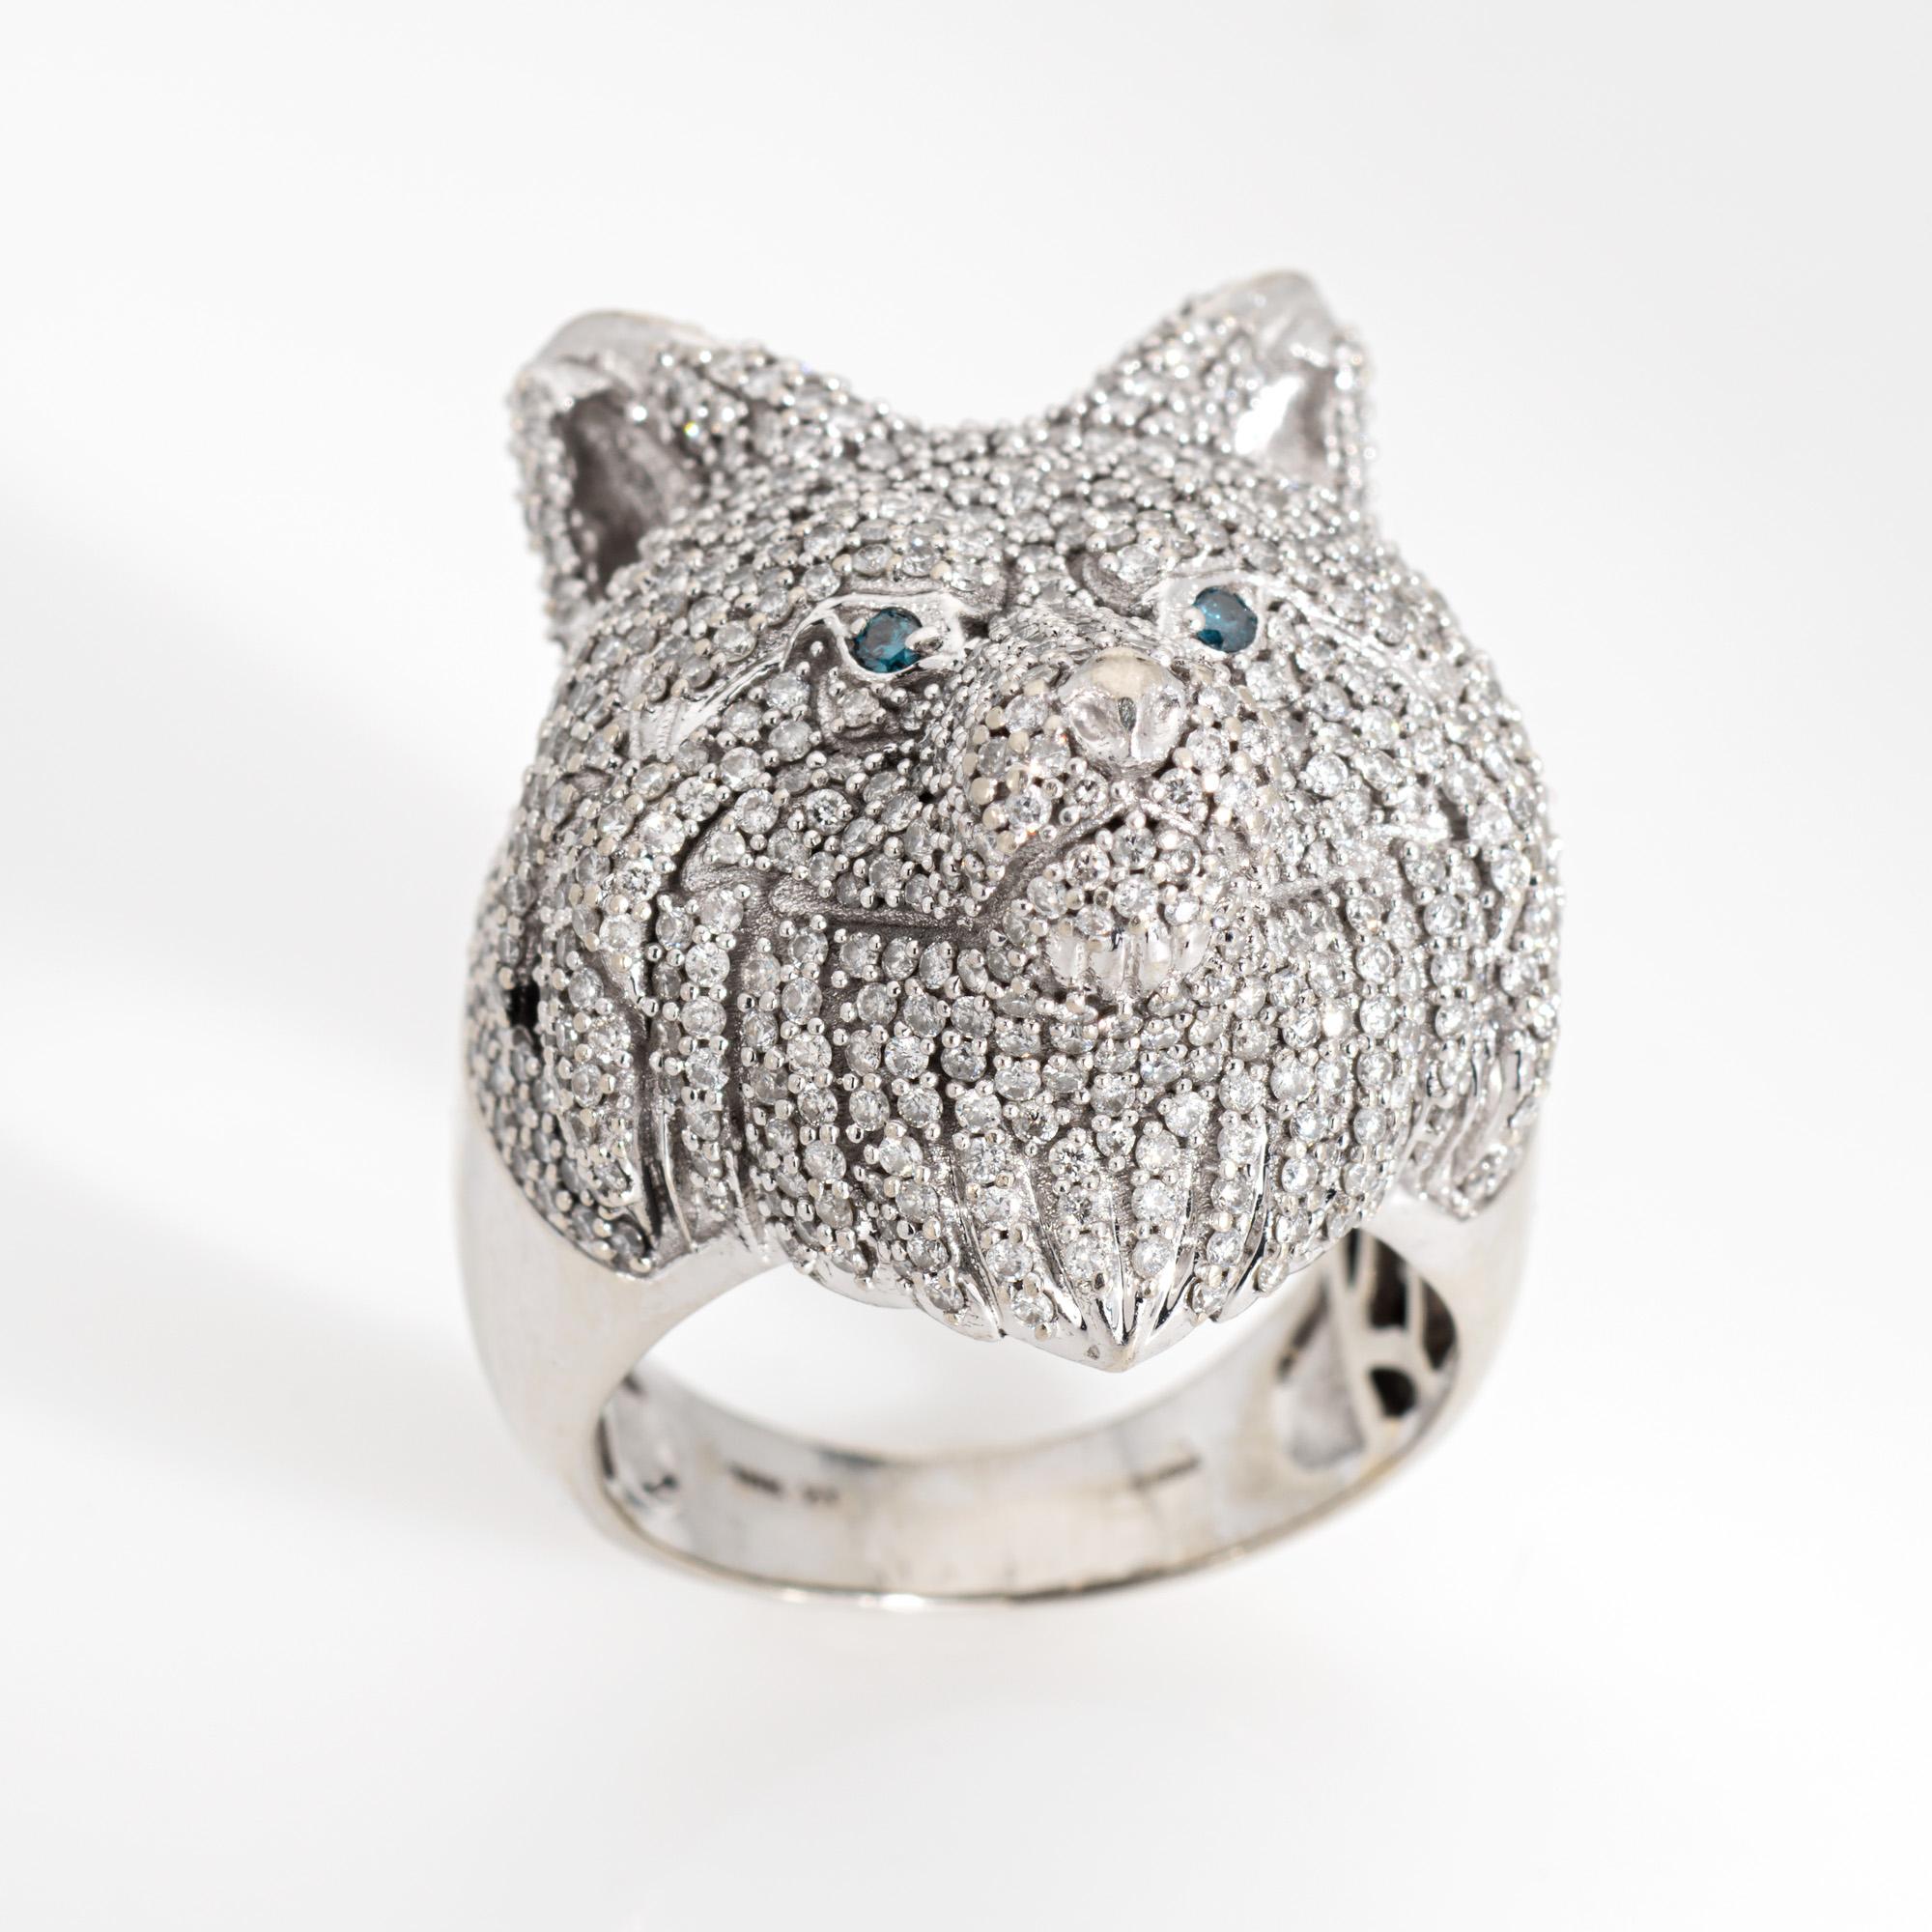 Bold and distinct pave diamond Bear ring crafted in 10 karat white gold. 

Pave set diamonds total 3.09 carats (estimated at H-I color and SI1-I2 clarity). Two blue diamonds (irritated) are set into the eyes. 

Bold and beautiful, the majestic beast